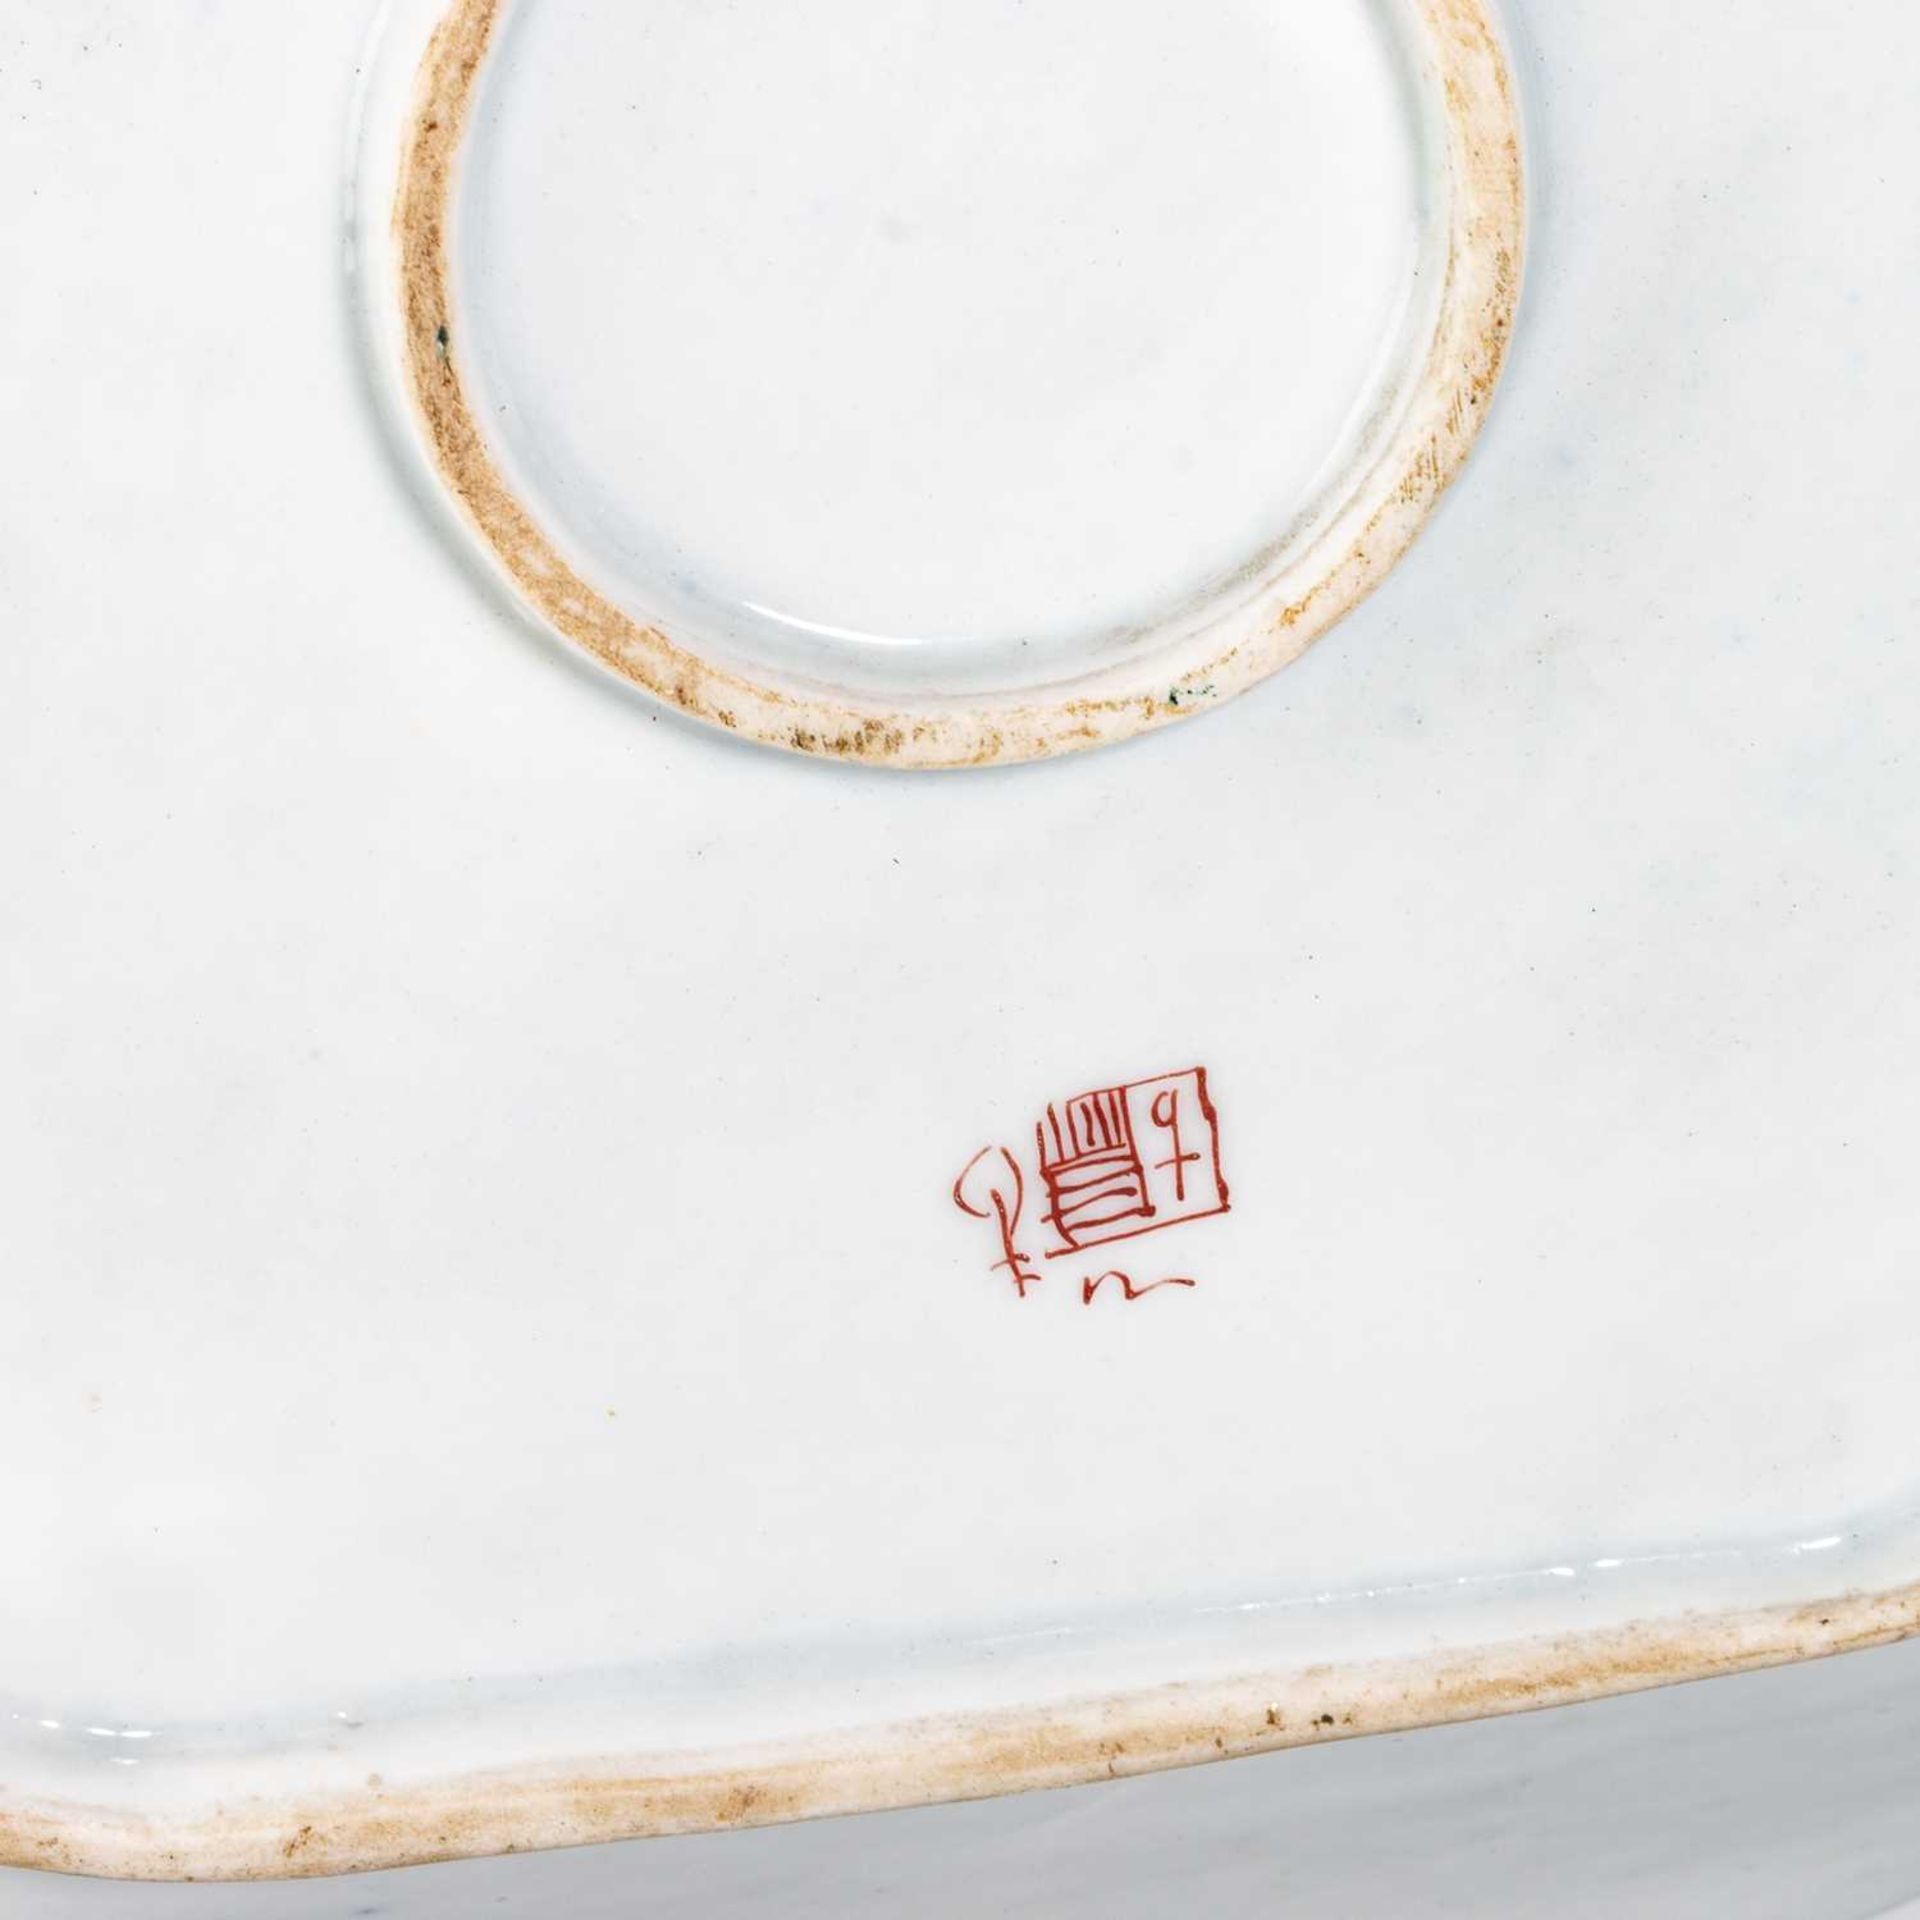 A SAMSON PORCELAIN DESSERT SERVICE IN CHINESE EXPORT ARMORIAL STYLE - Image 6 of 6